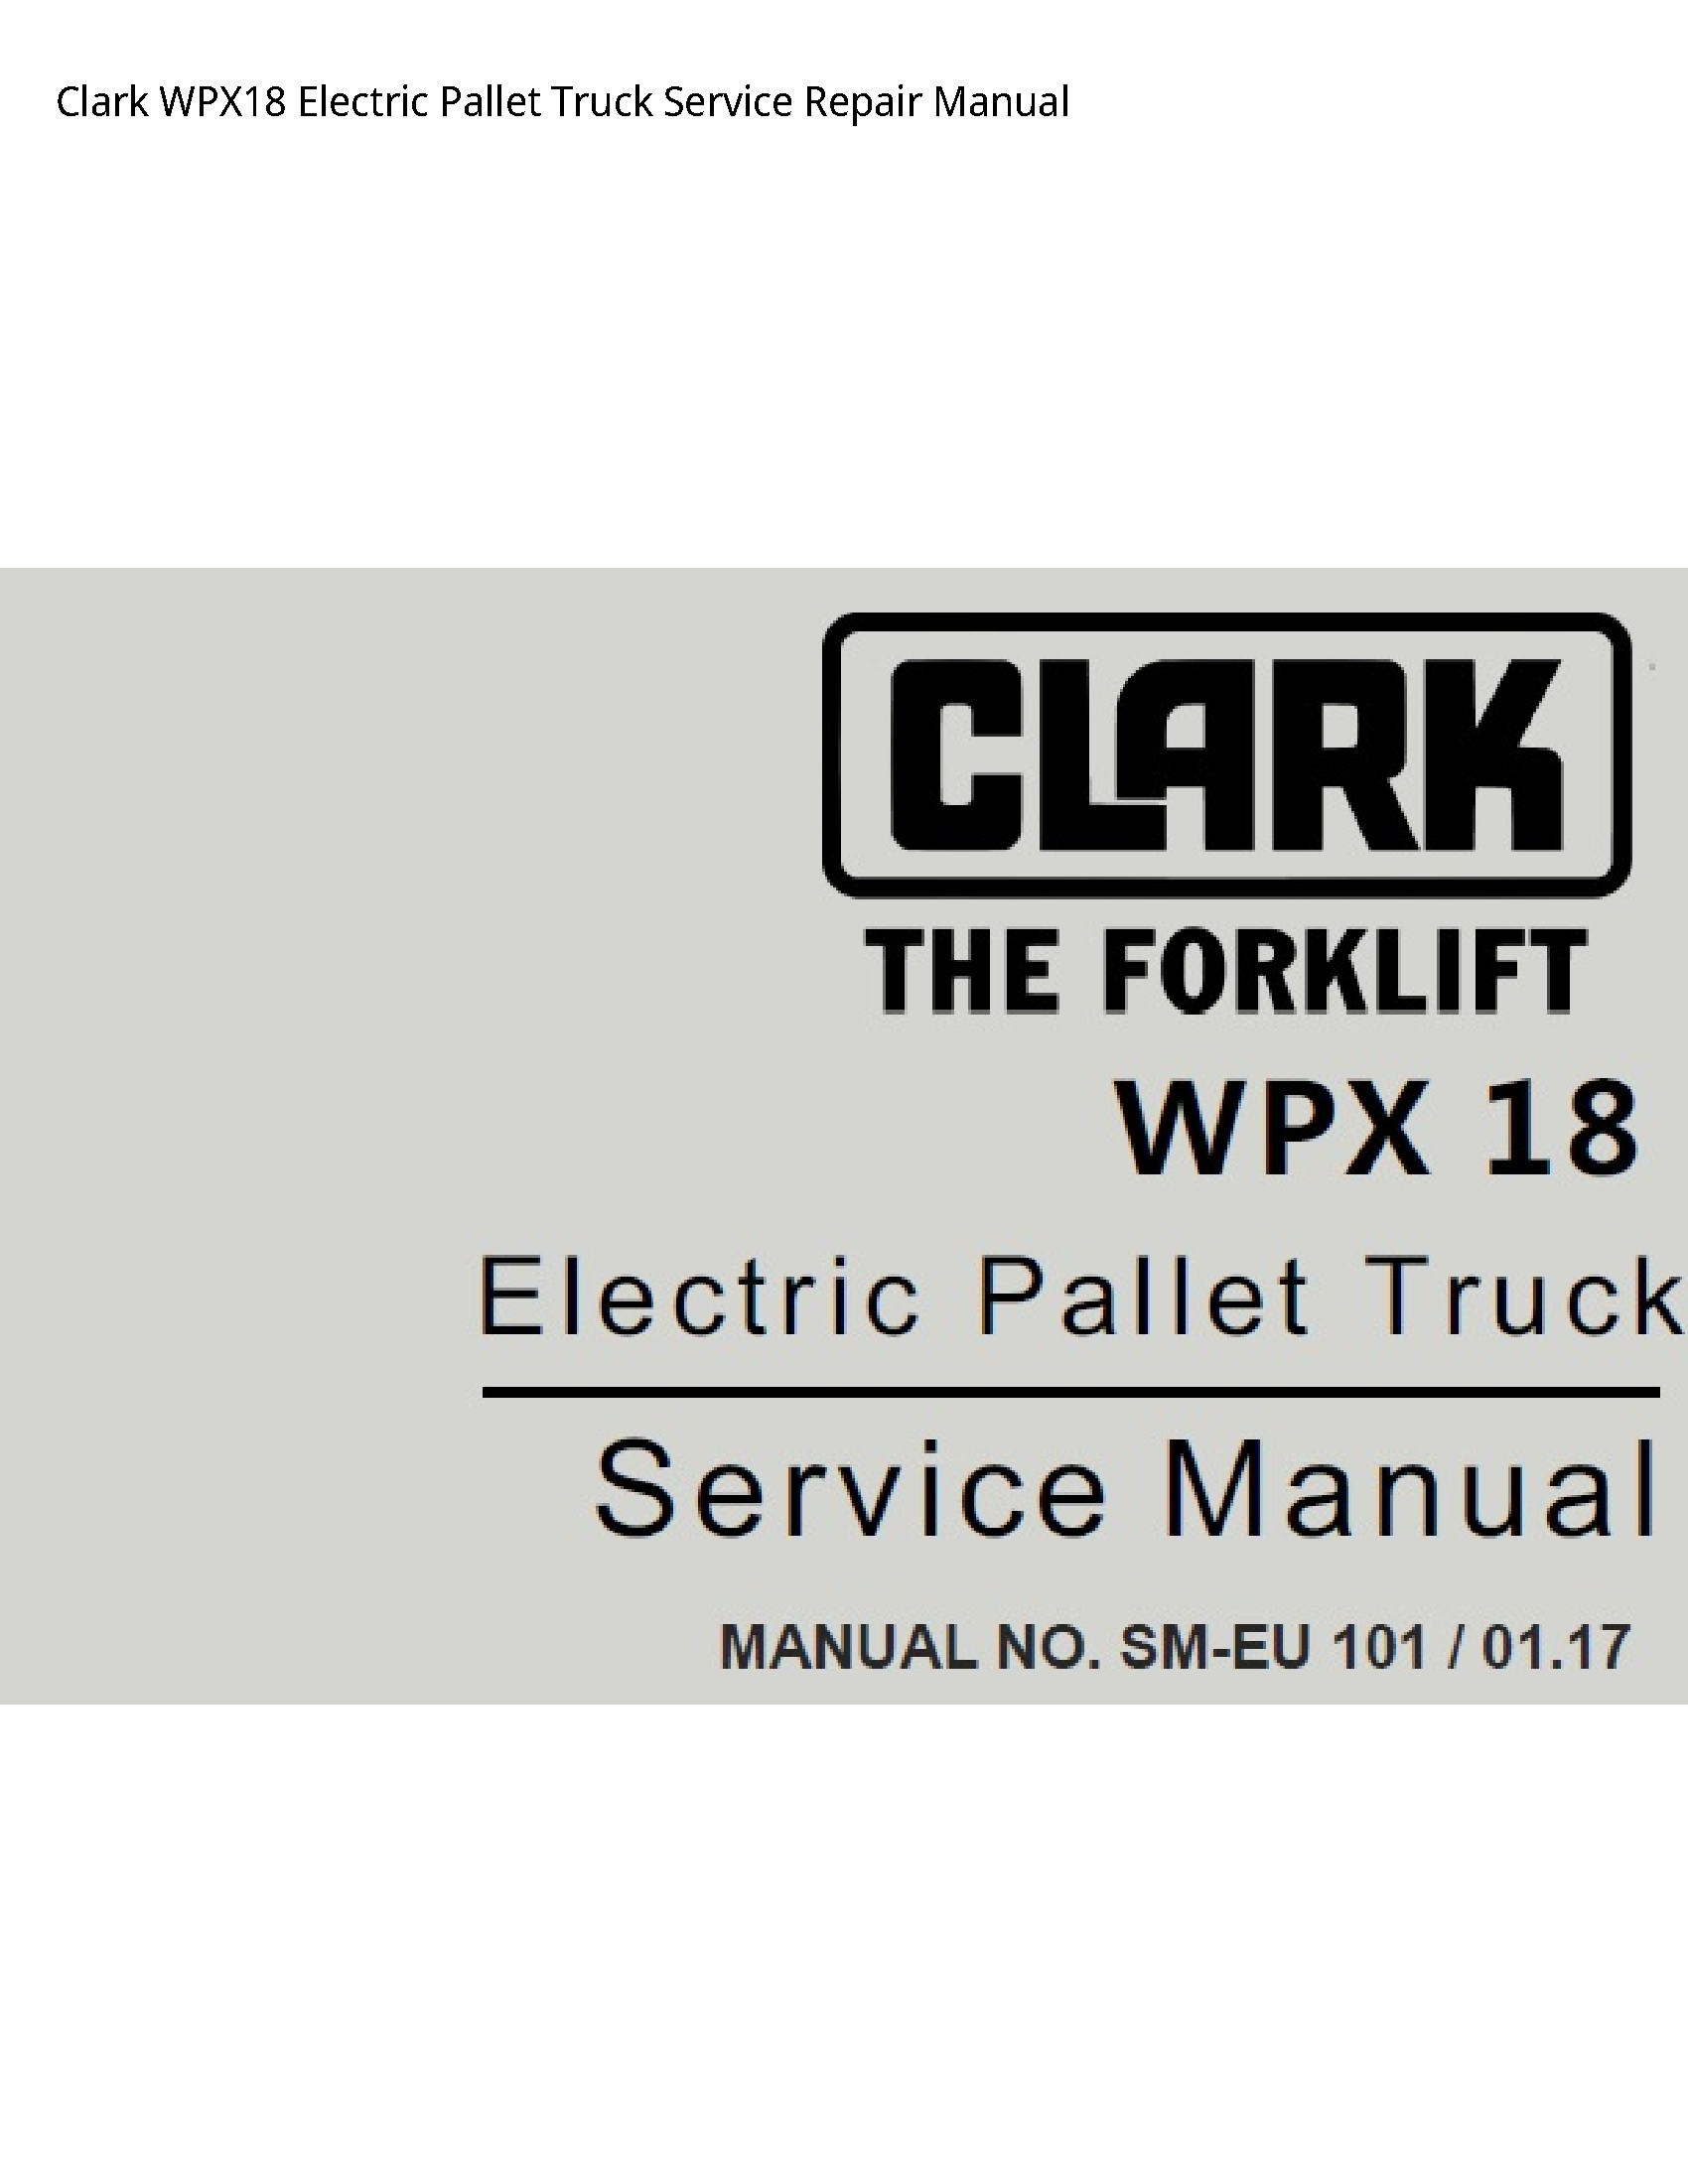 Clark WPX18 Electric Pallet Truck manual